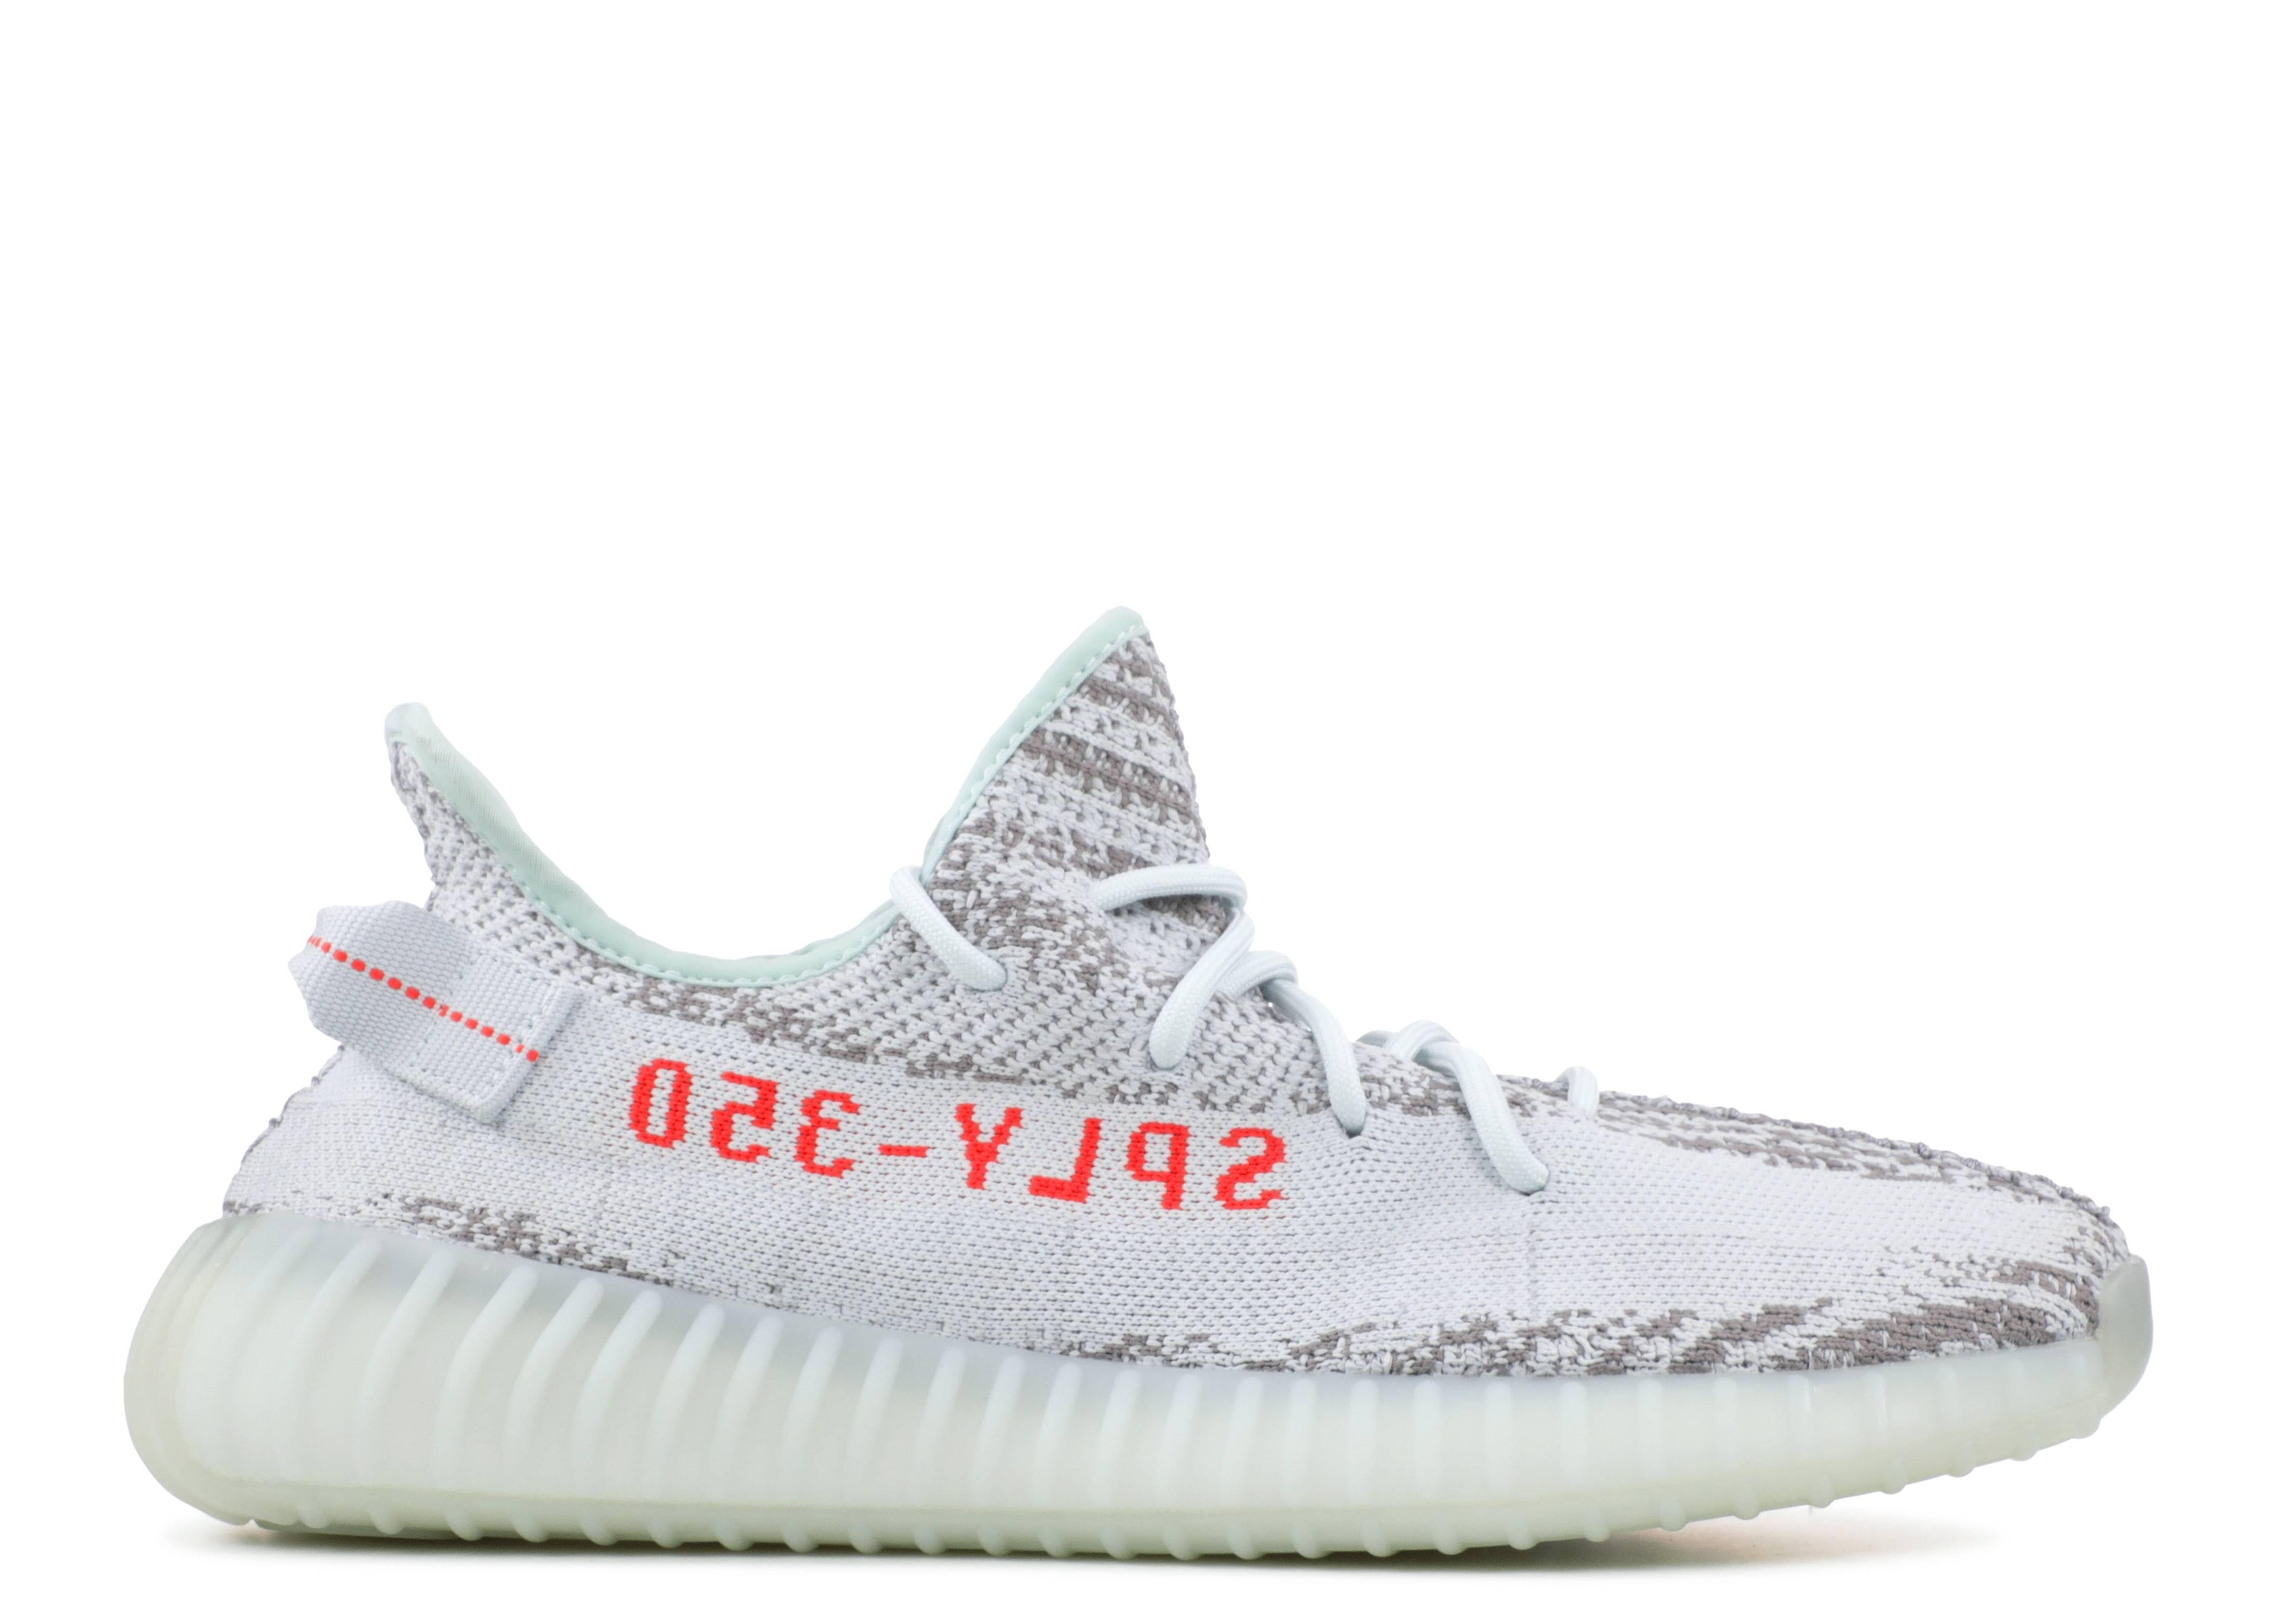 adidas Yeezy Boost 350 V2 Blue Tint for 